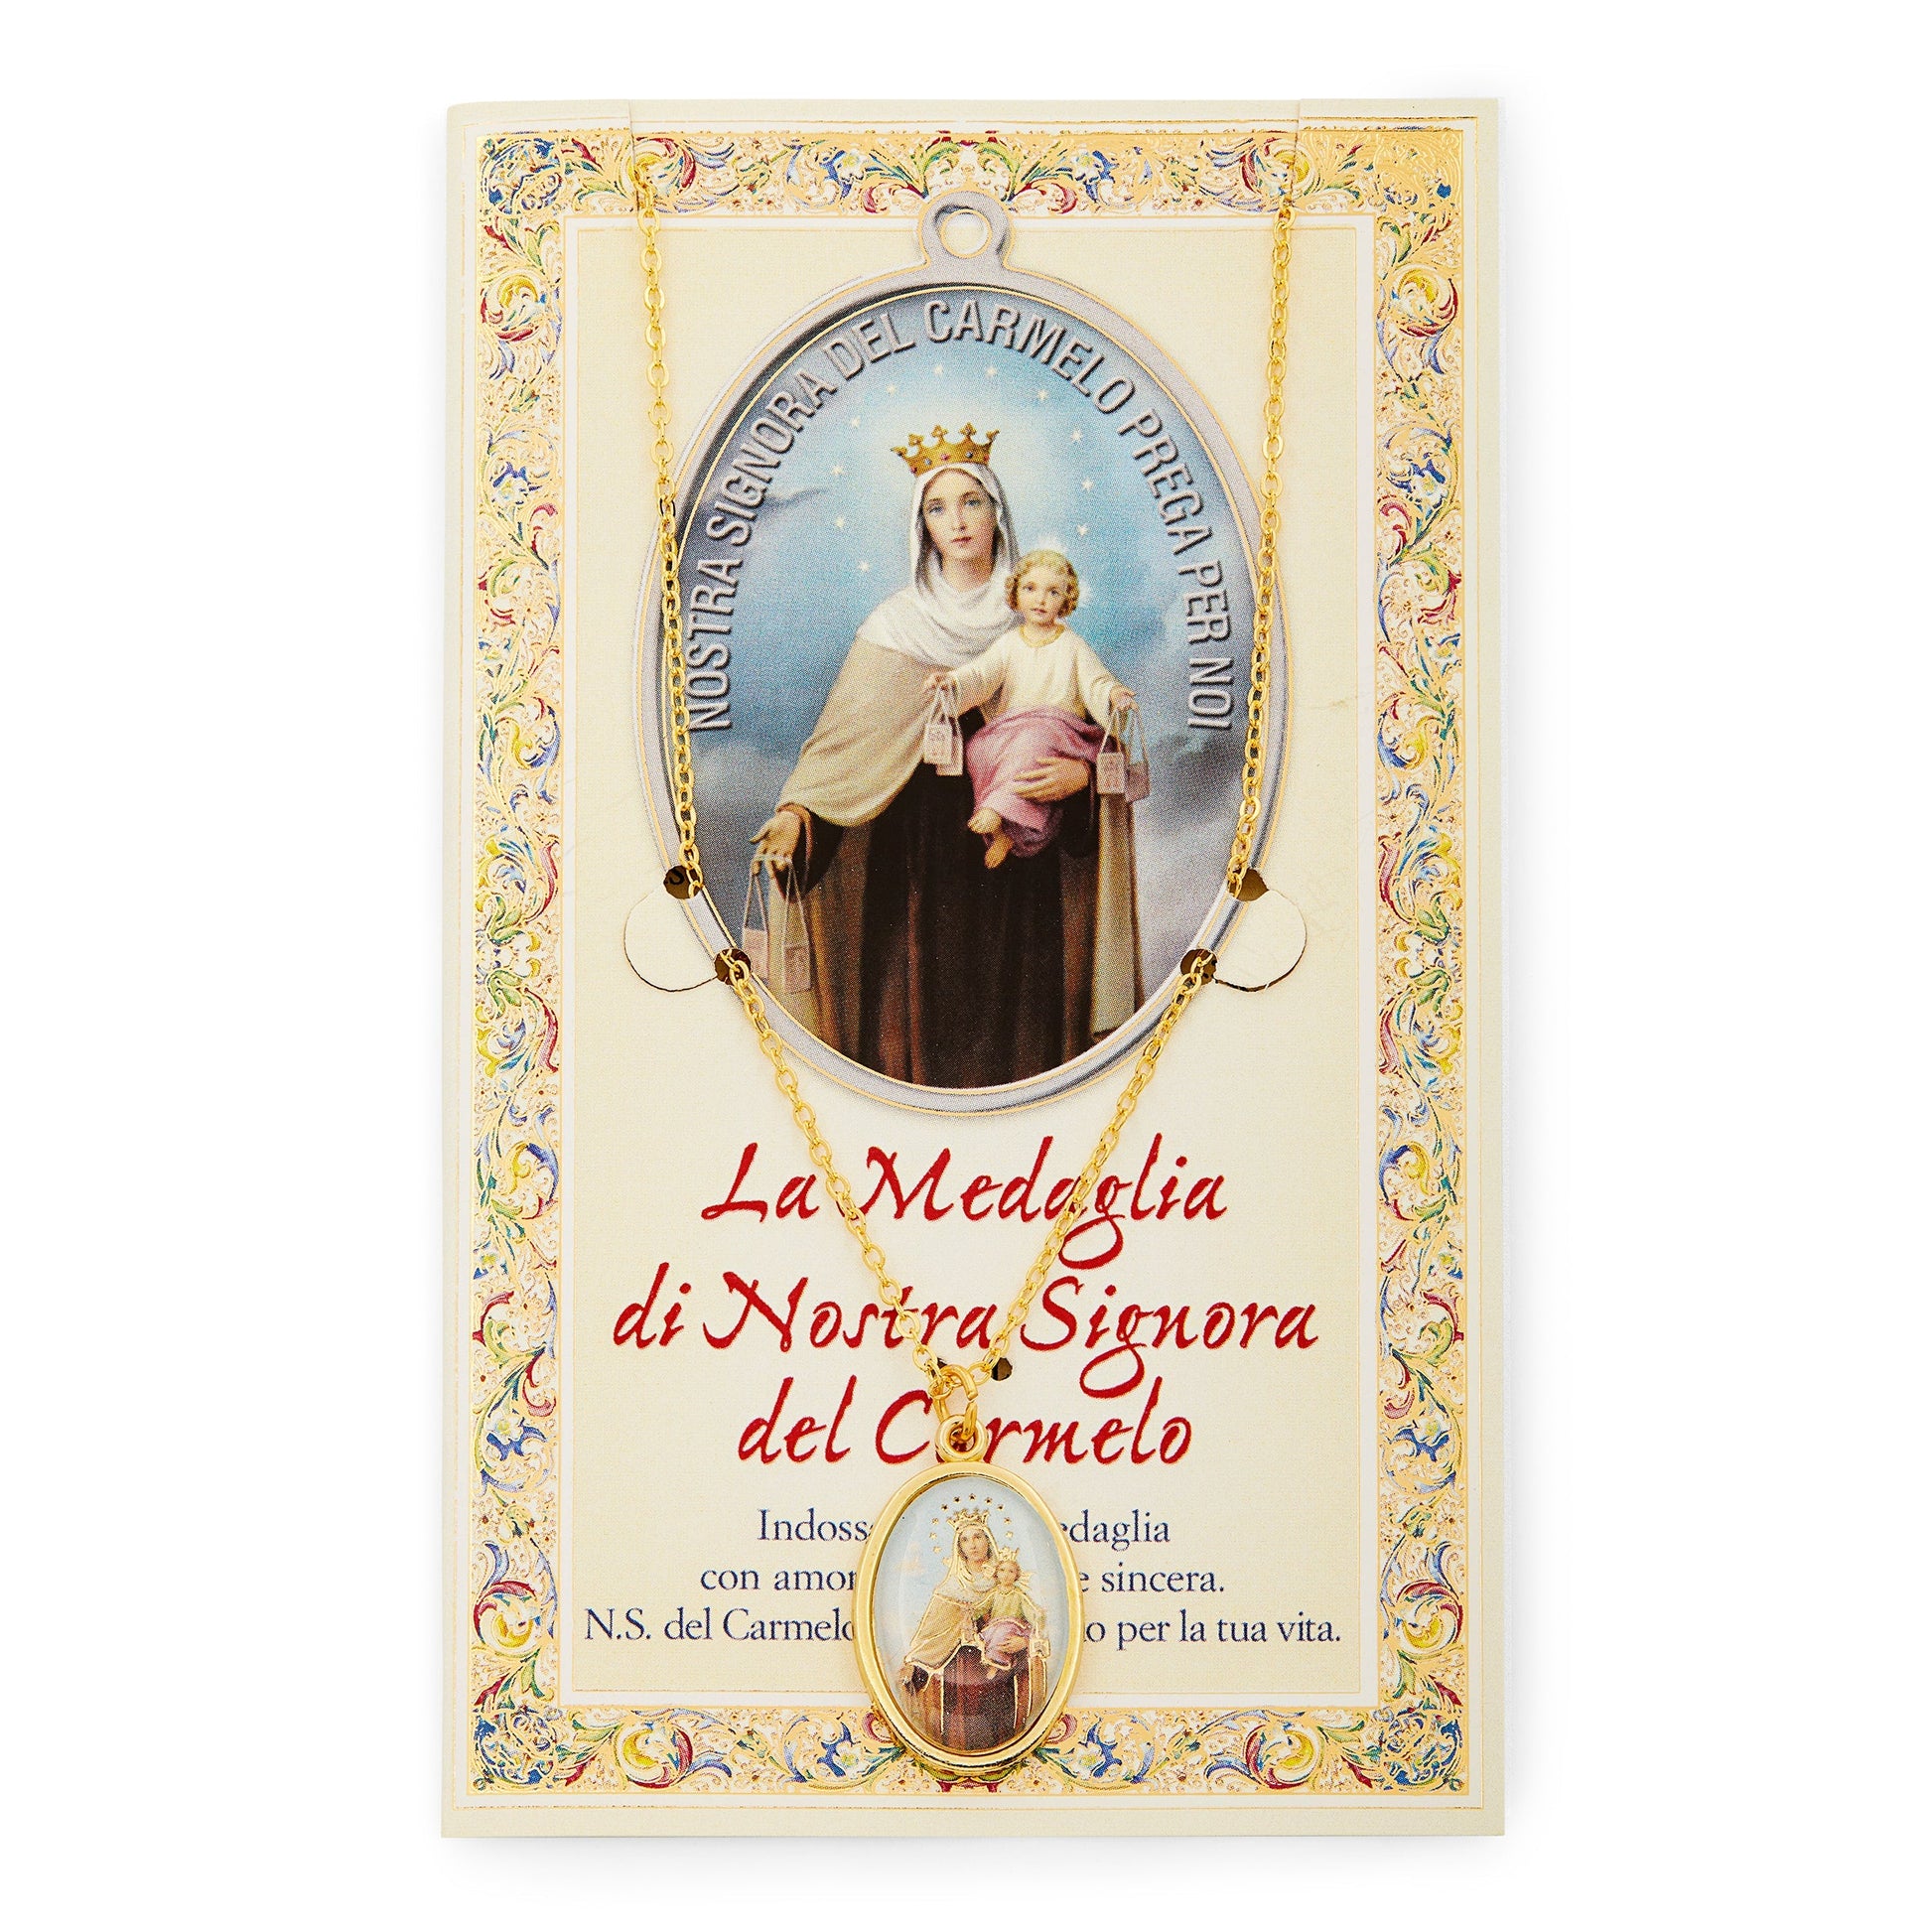 MONDO CATTOLICO Our Lady of Mount Carmel Holy Card and Medal with the Chain